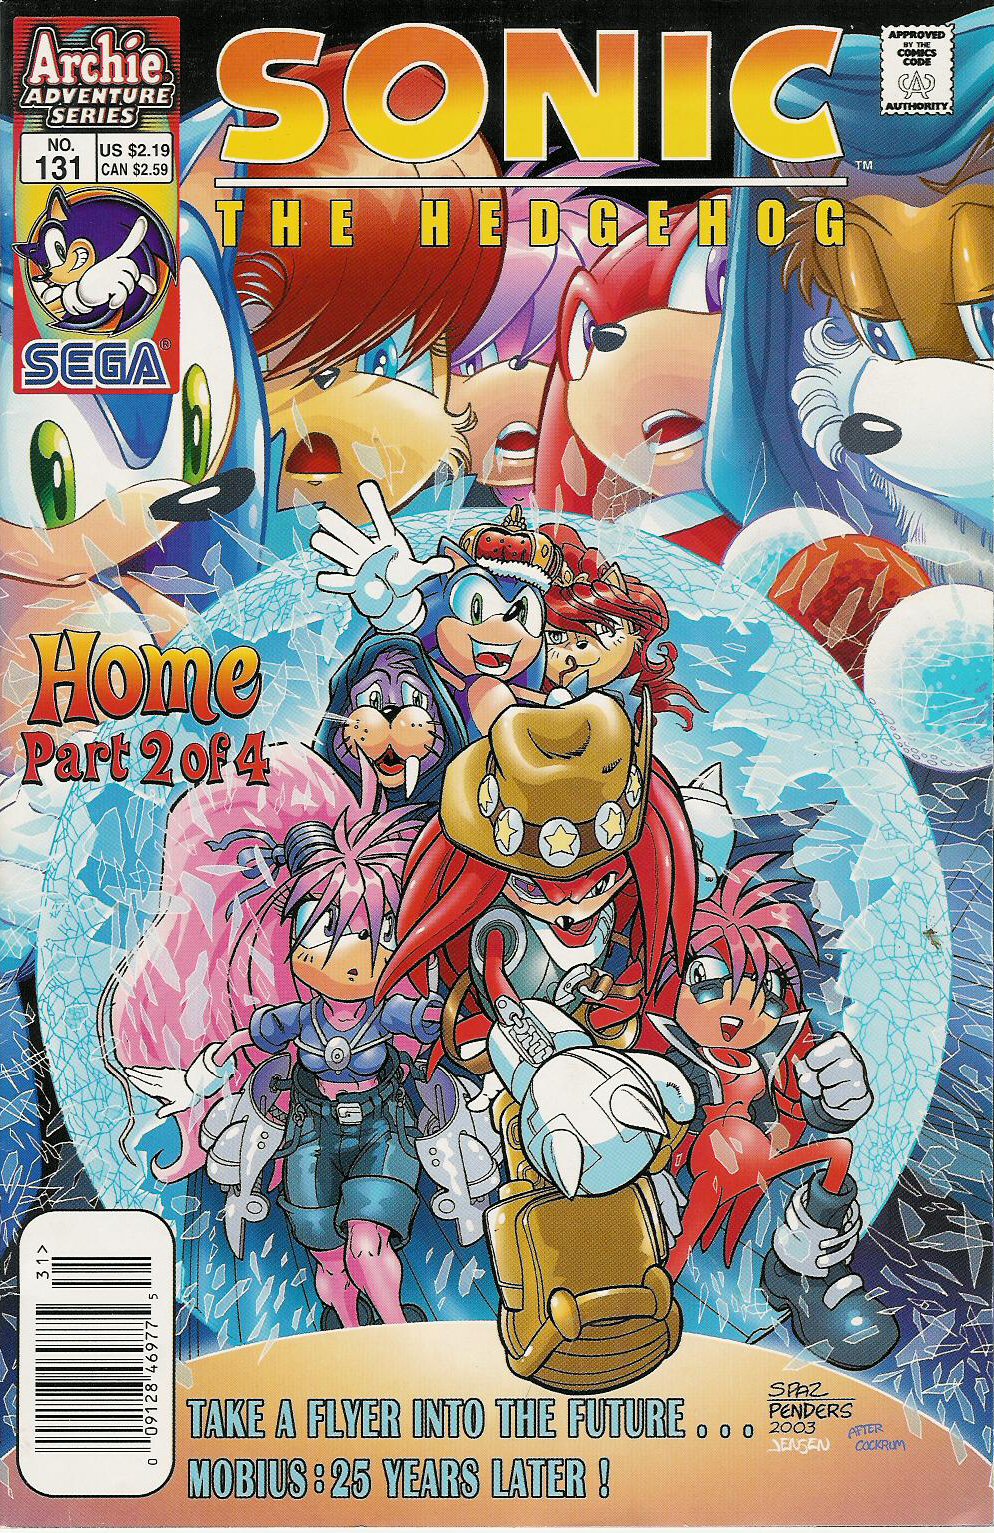 Sonic - Archie Adventure Series March 2004 Comic cover page